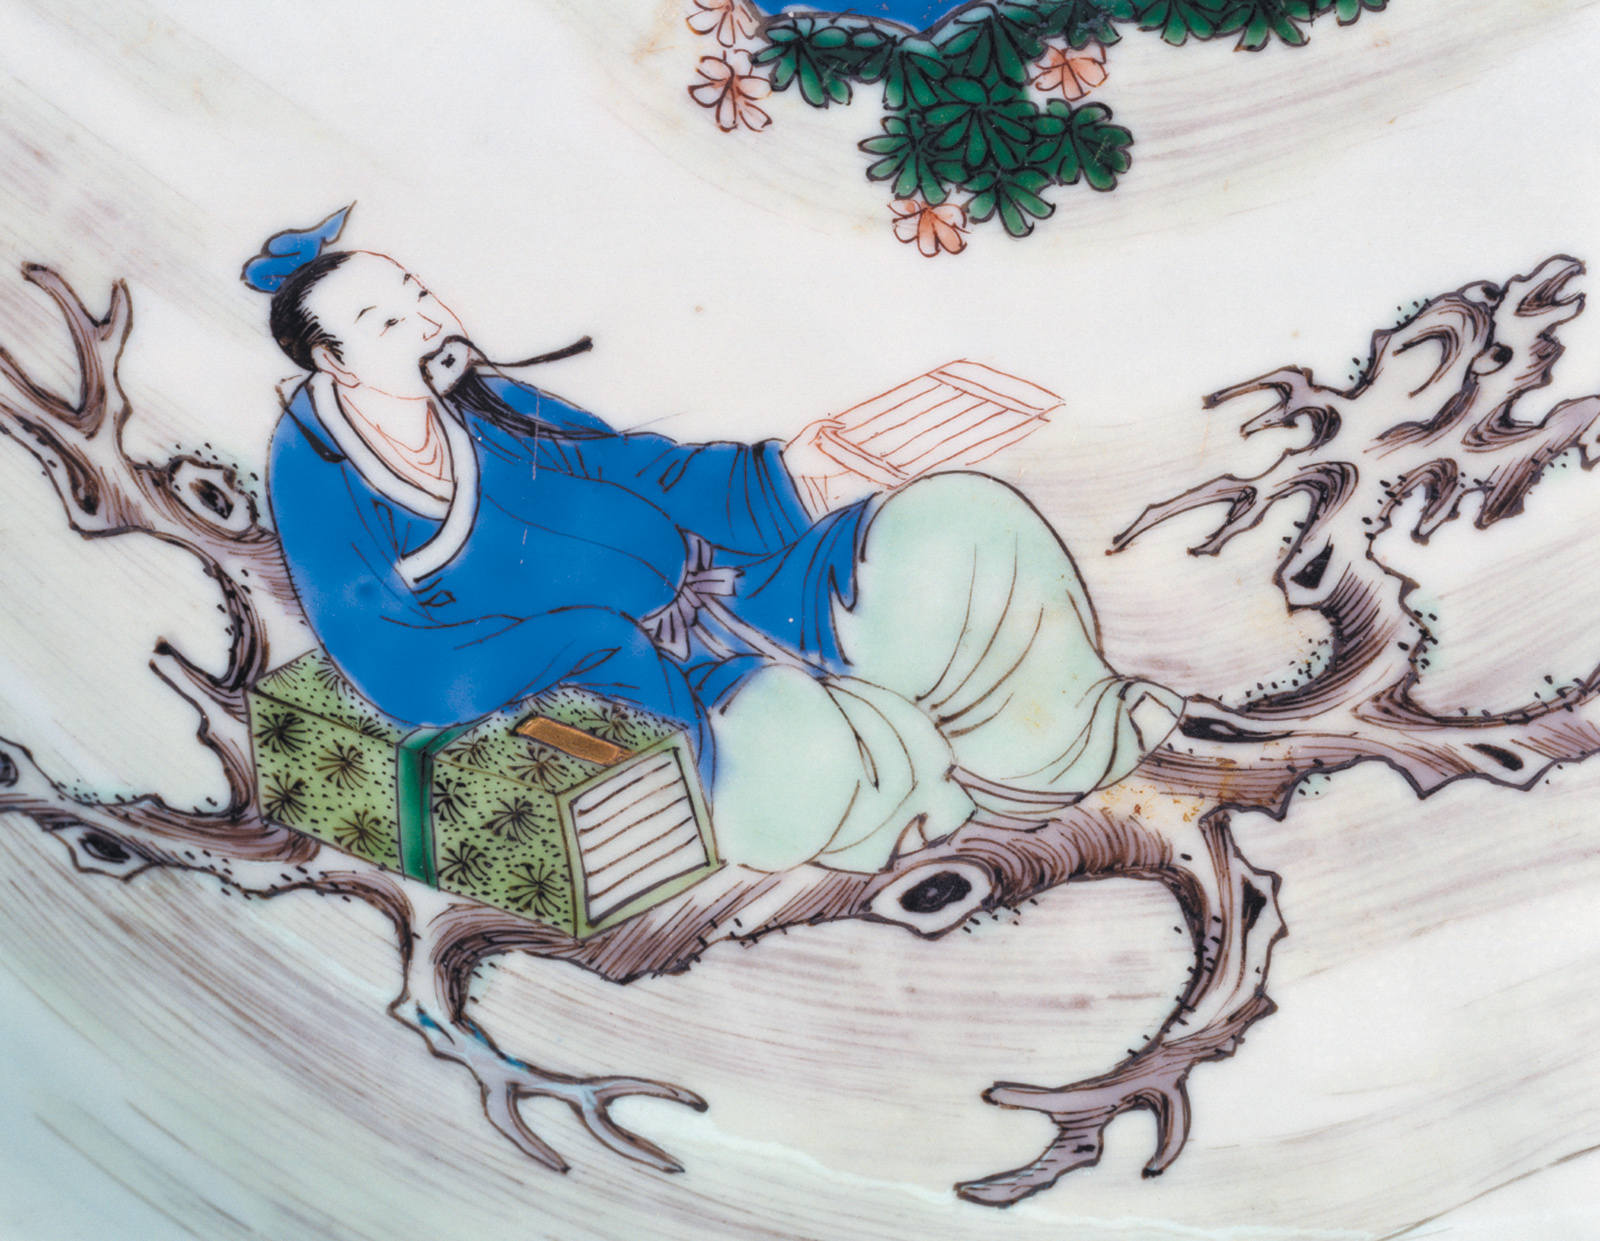 The poet Li Po; portrait from a ceramic plate, Qing Dynasty, circa 1700